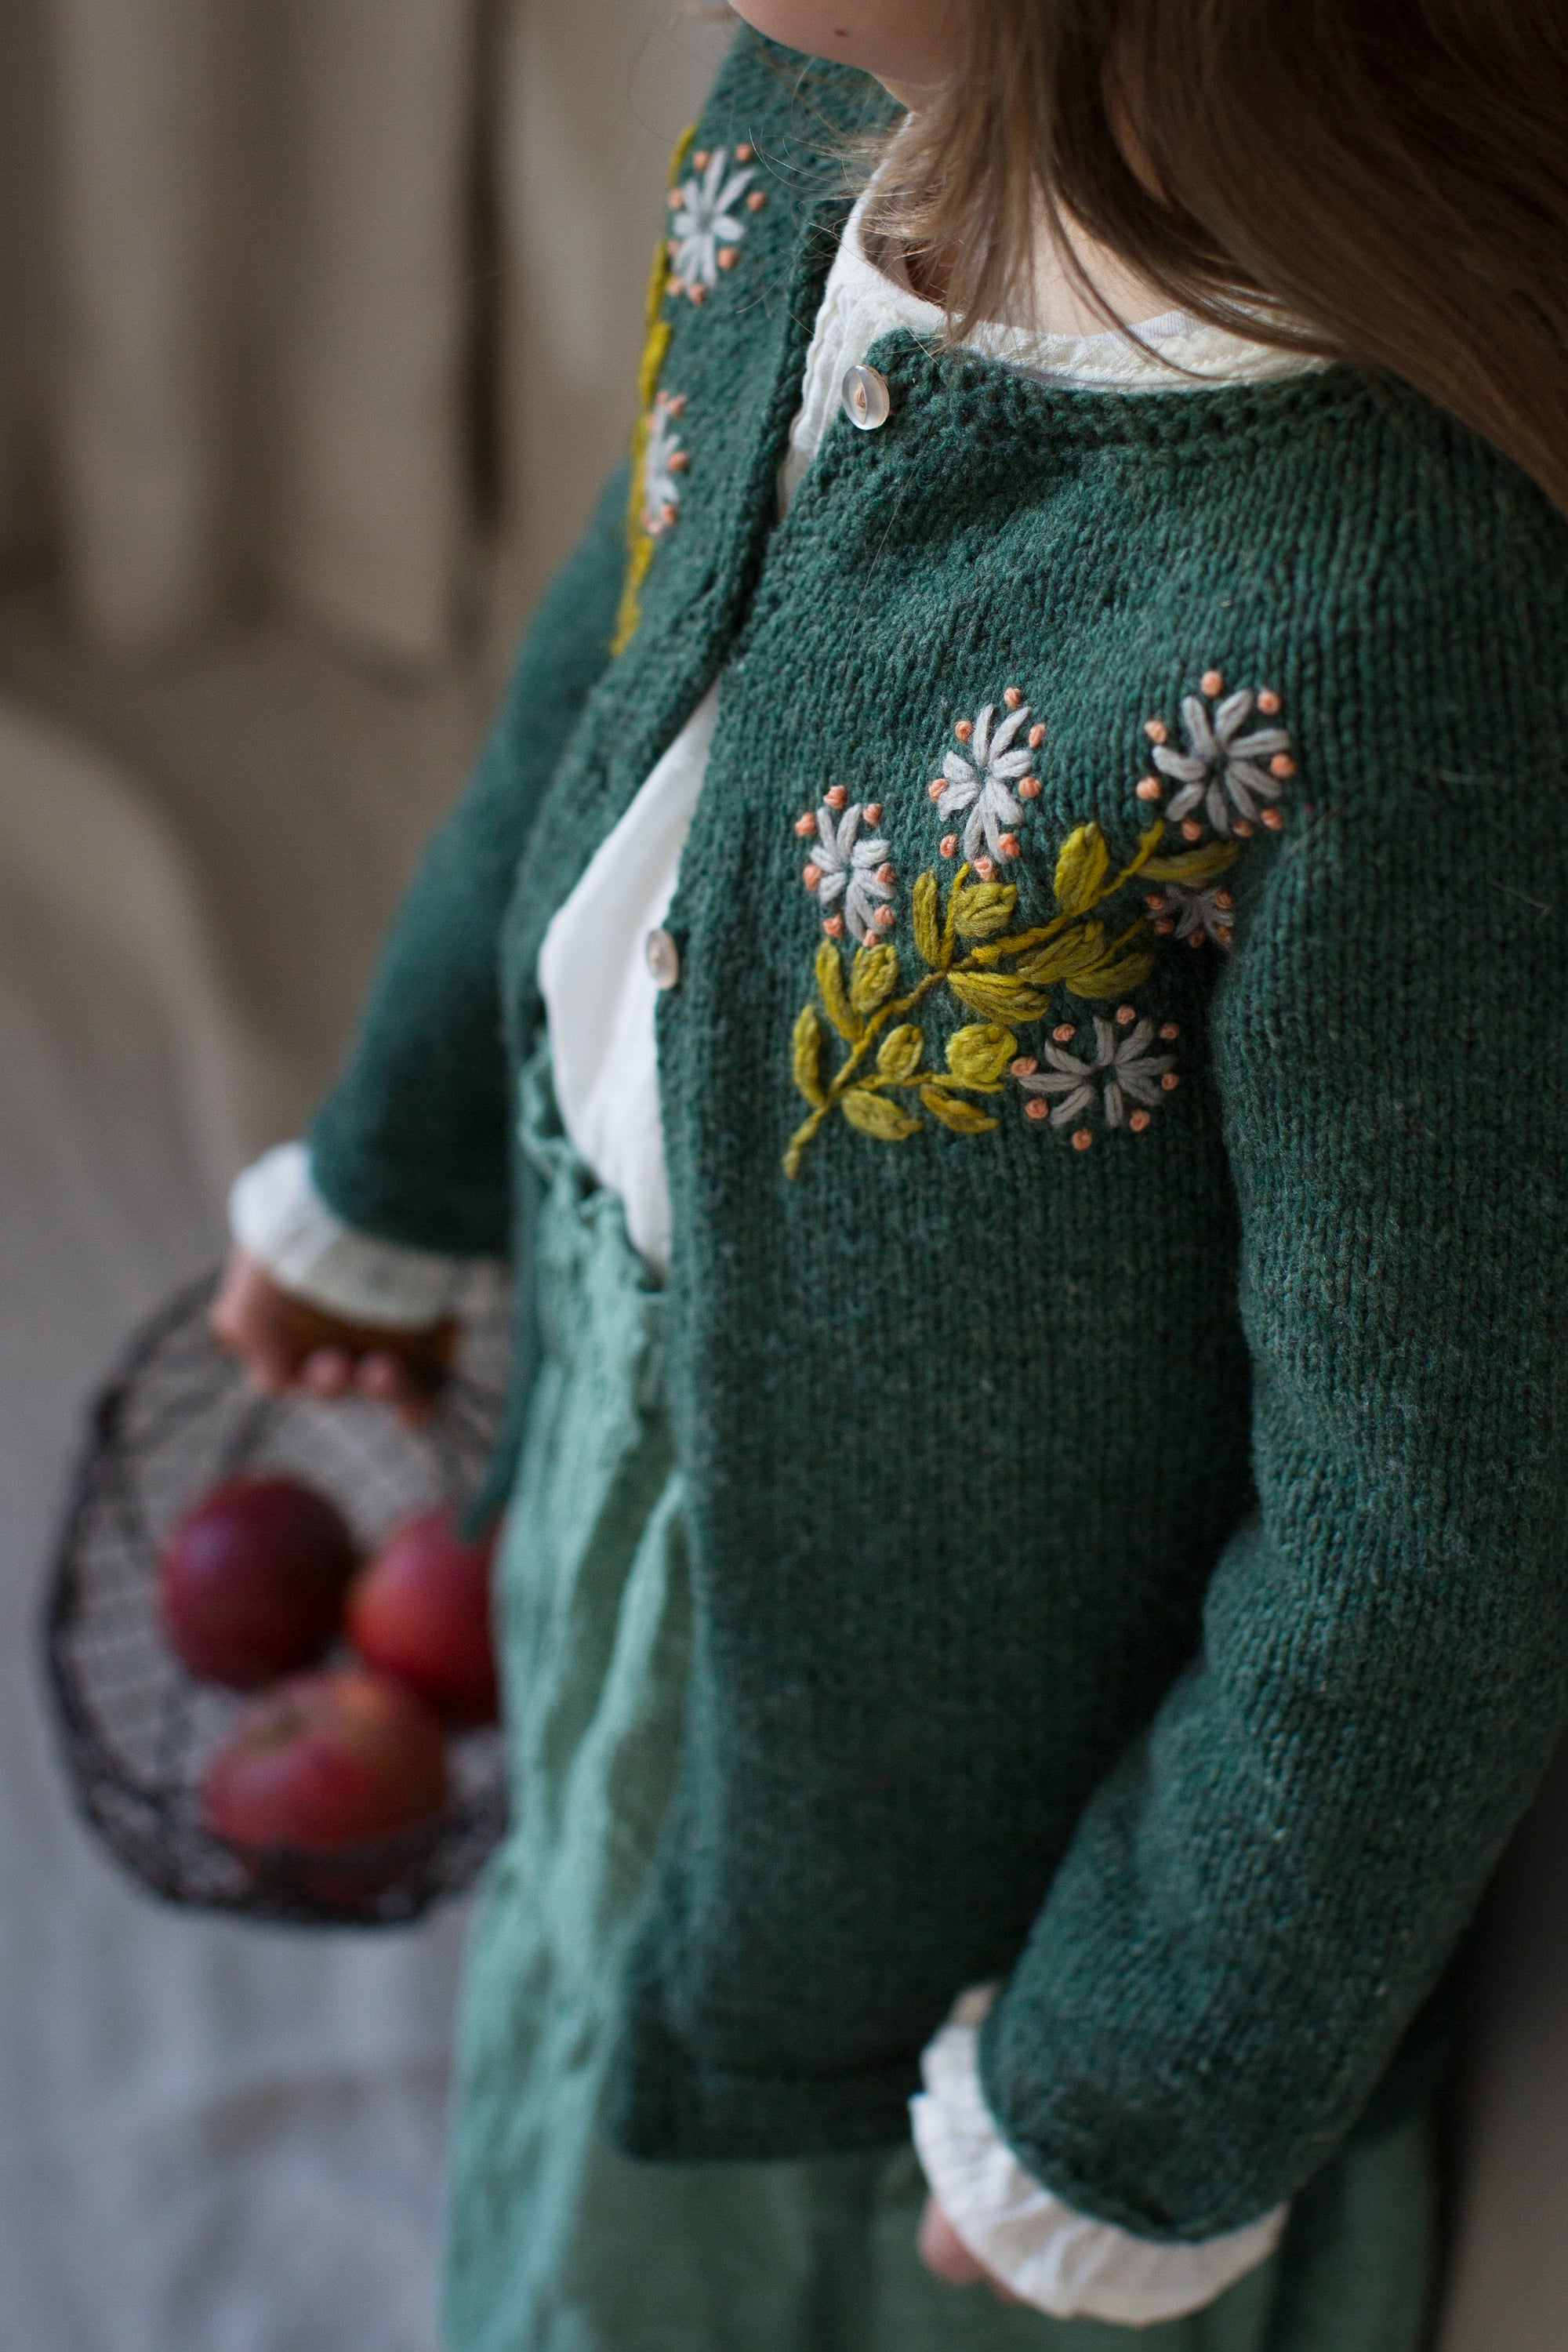 Embroidery on Knits by Judit Gummlich Laine